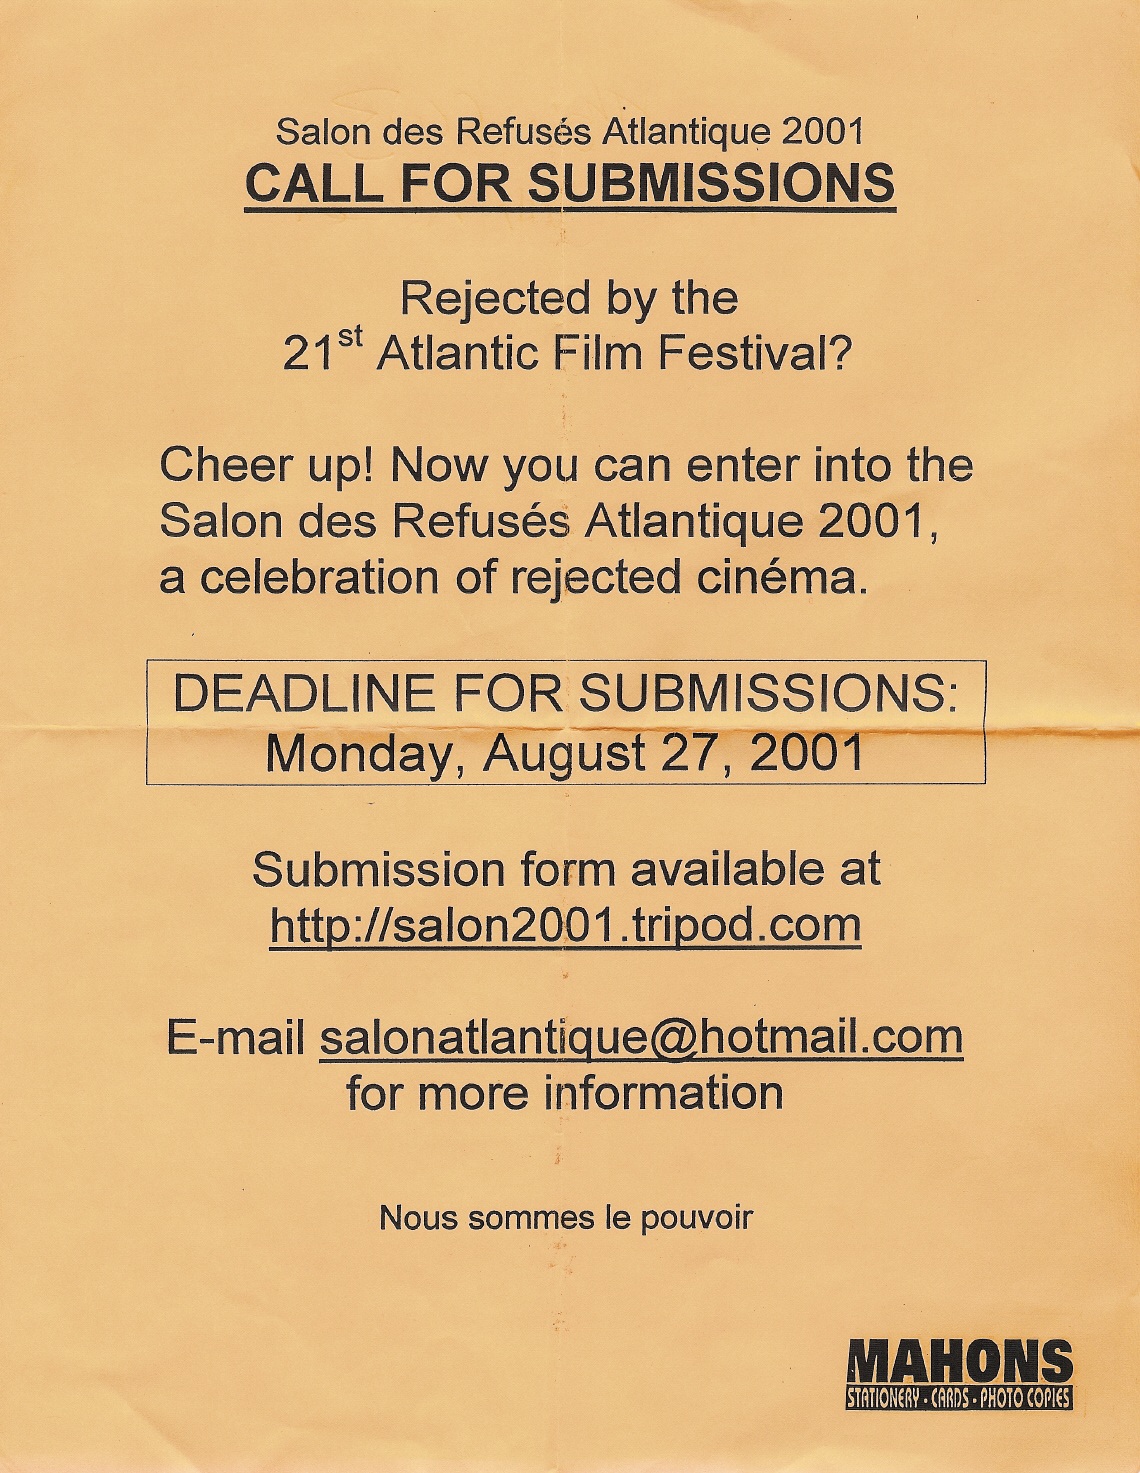 The first ever call for submissions